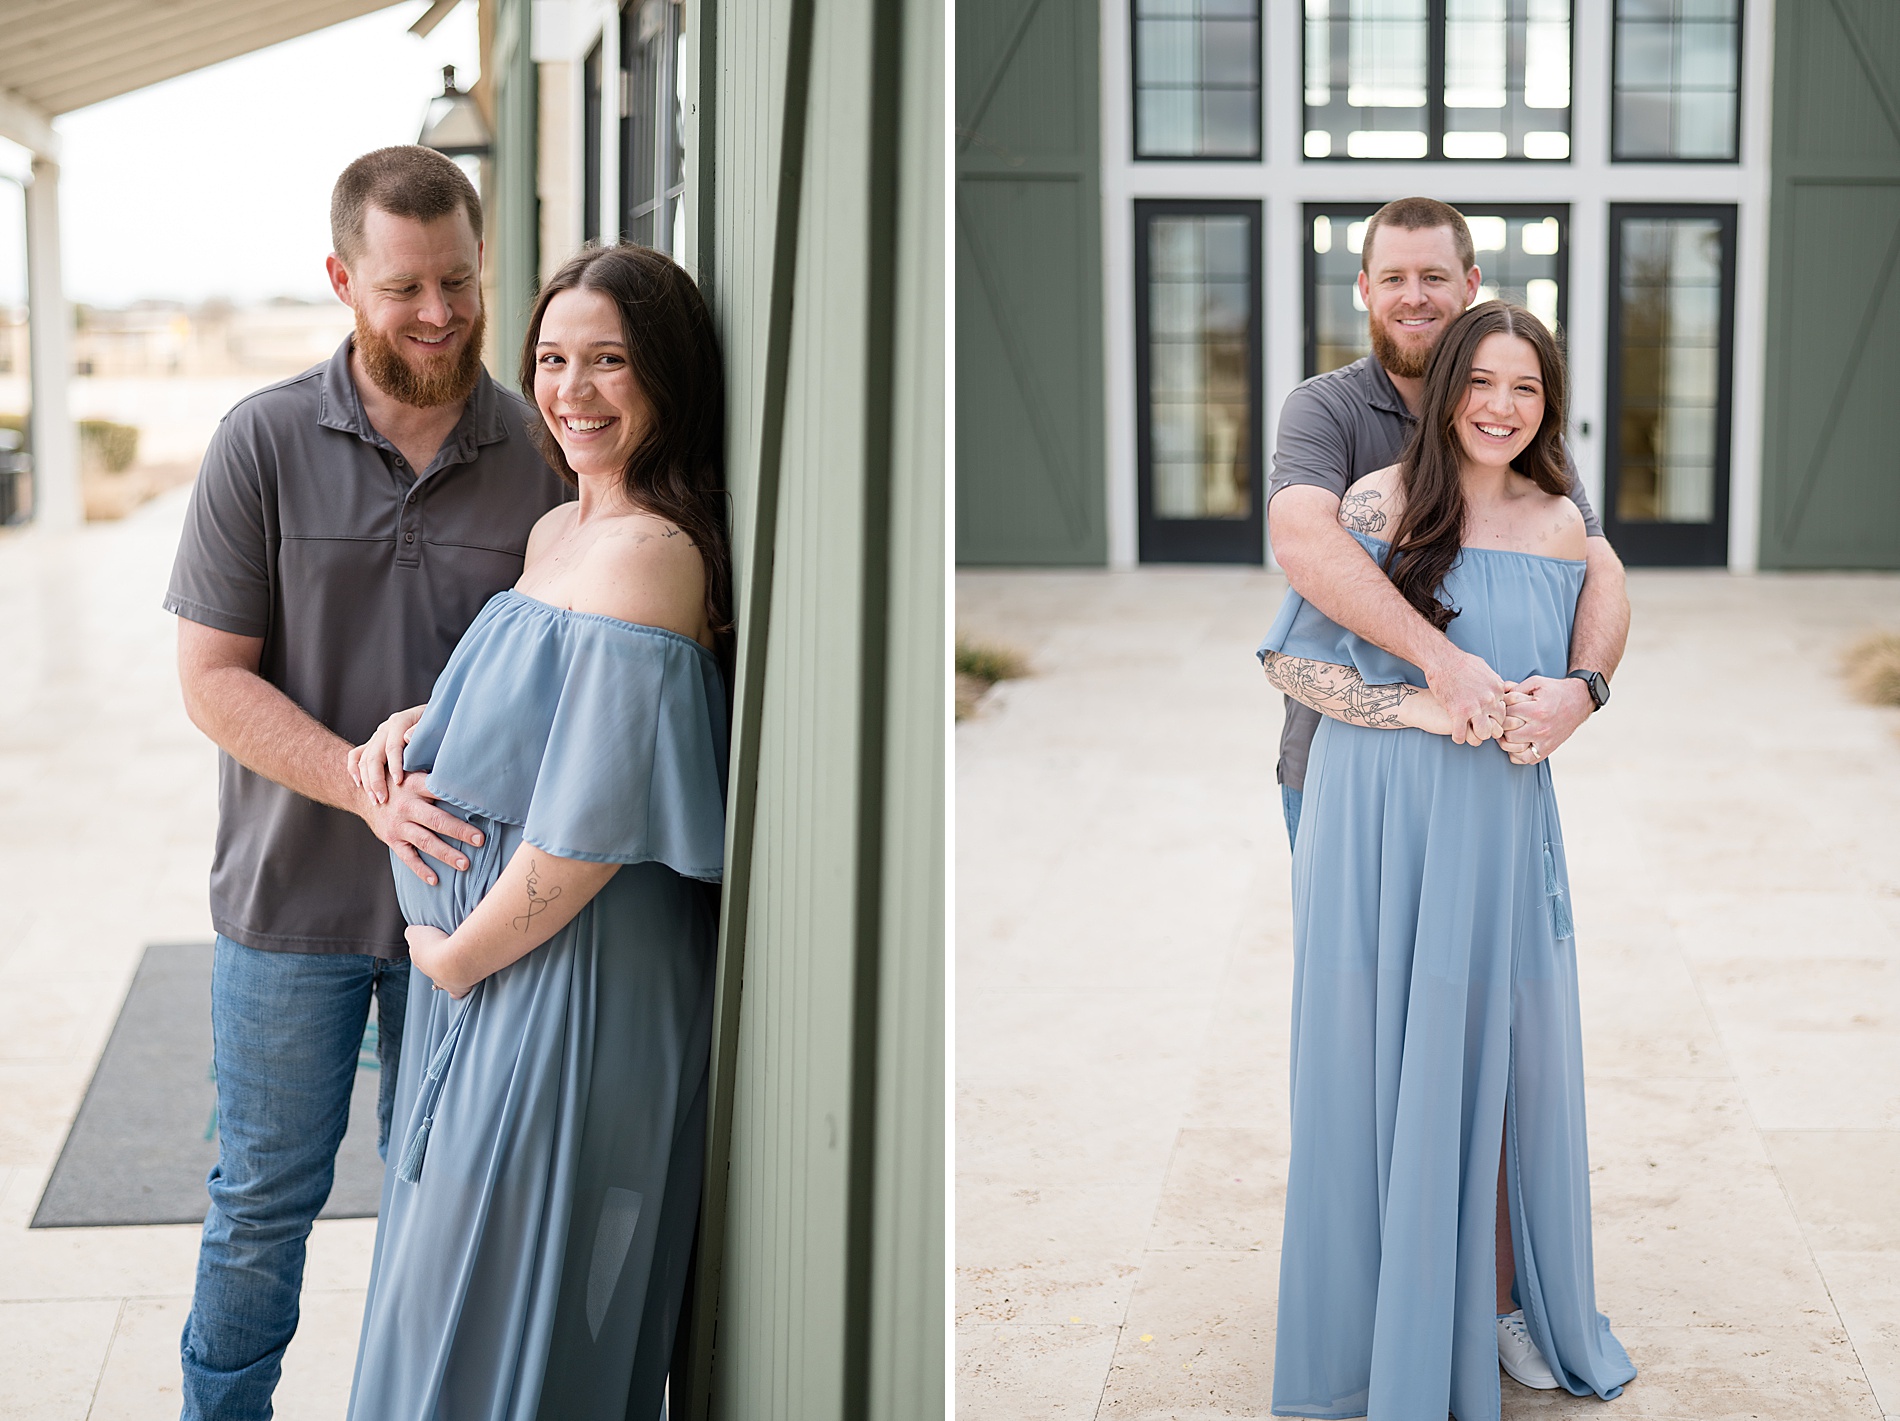 The Carriage House maternity portraits taken by Lindsey Dutton Photography, a Dallas maternity photographer
